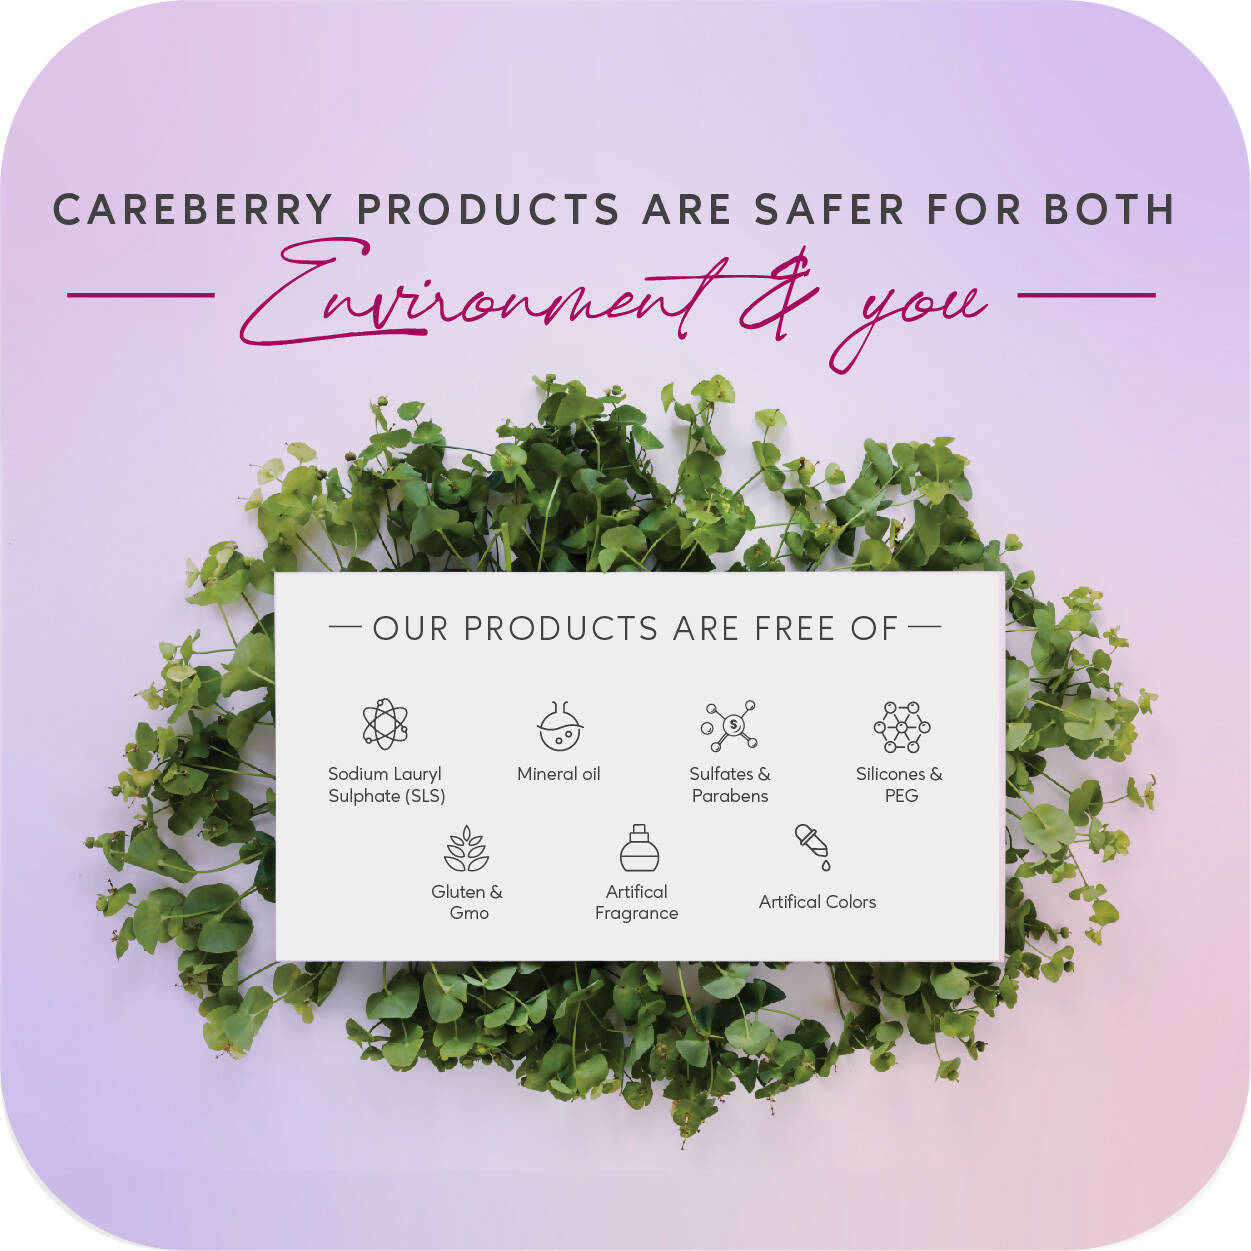 Careberry Organic Red Onion & Black Seed Oil Shampoo + Conditioner For Anti Hair Fall - Distacart